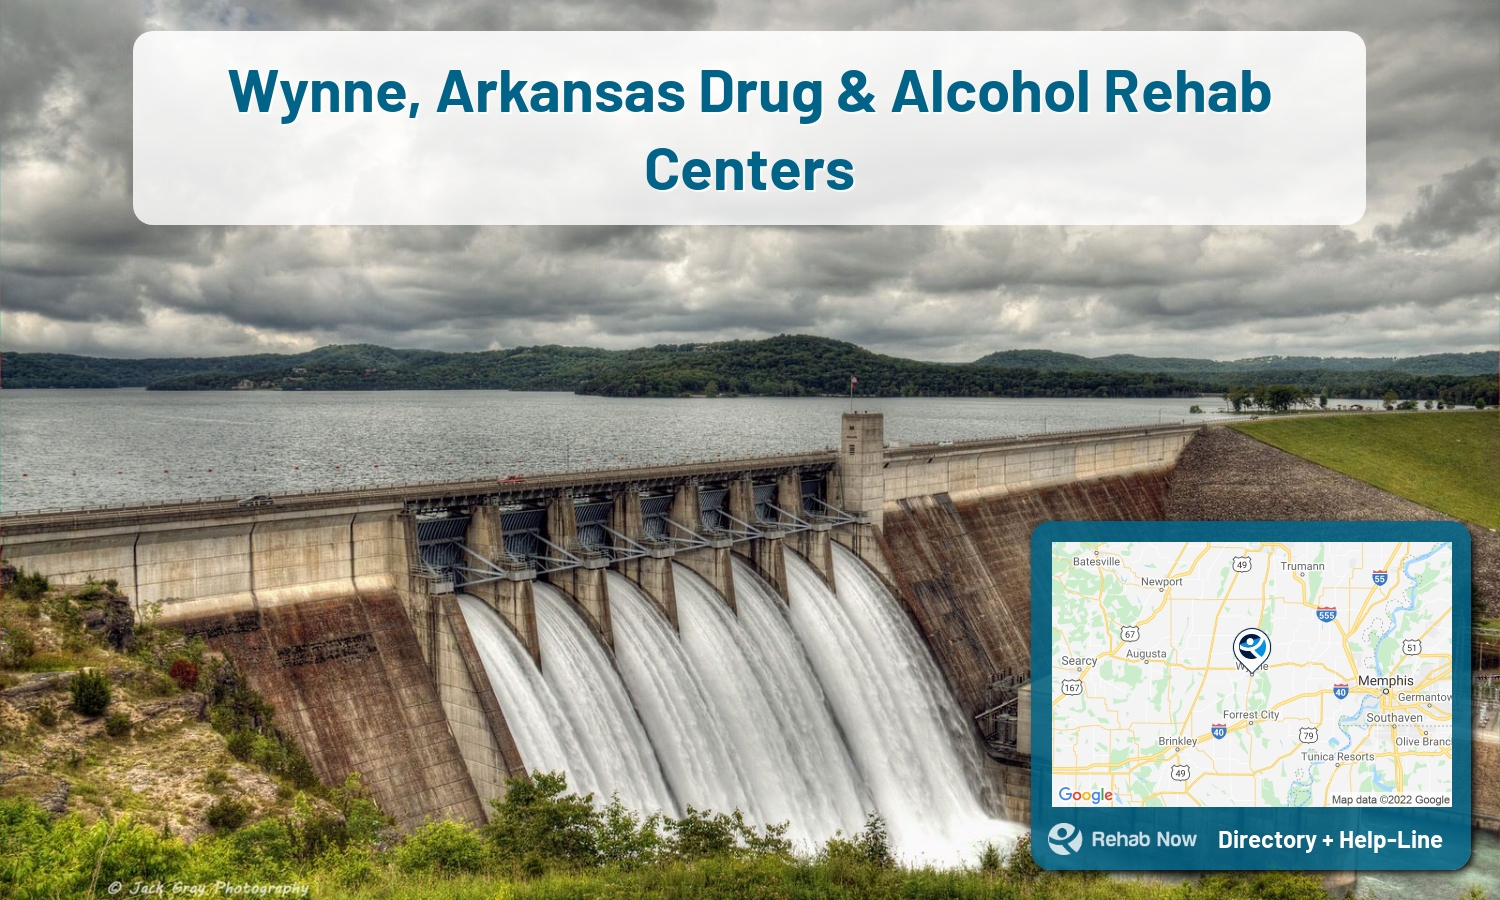 View options, availability, treatment methods, and more, for drug rehab and alcohol treatment in Wynne, Arkansas